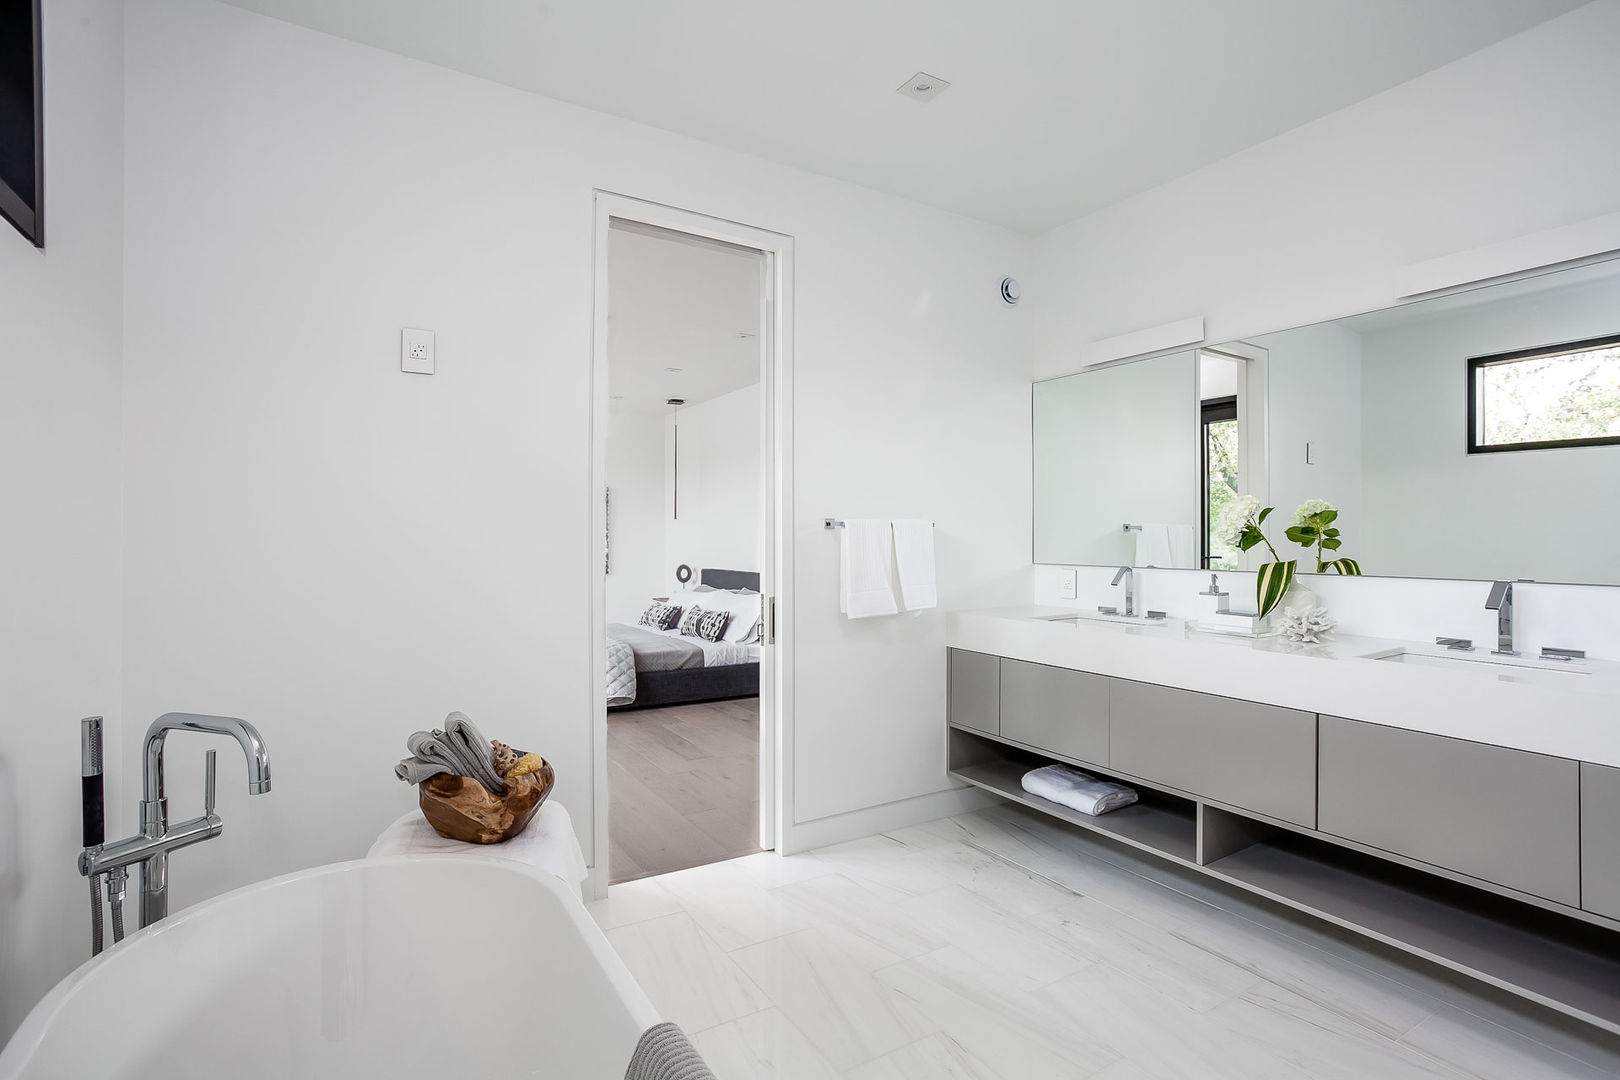 New Build-Staging, Frahm Interiors Frahm Interiors Modern style bathrooms